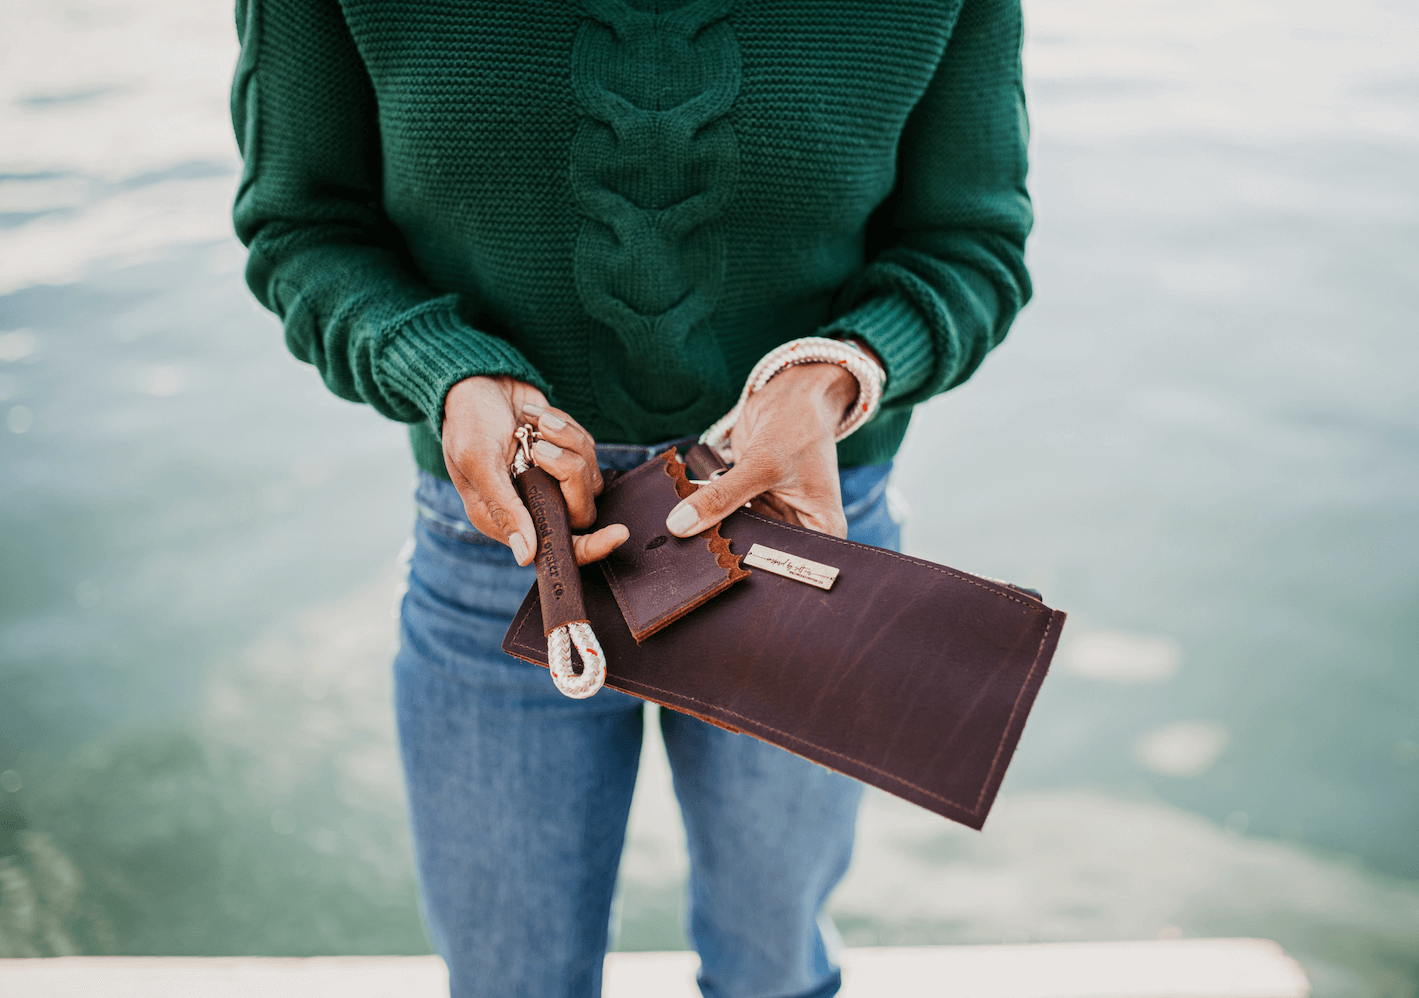 Woman holding keychain, wallet, and clutch